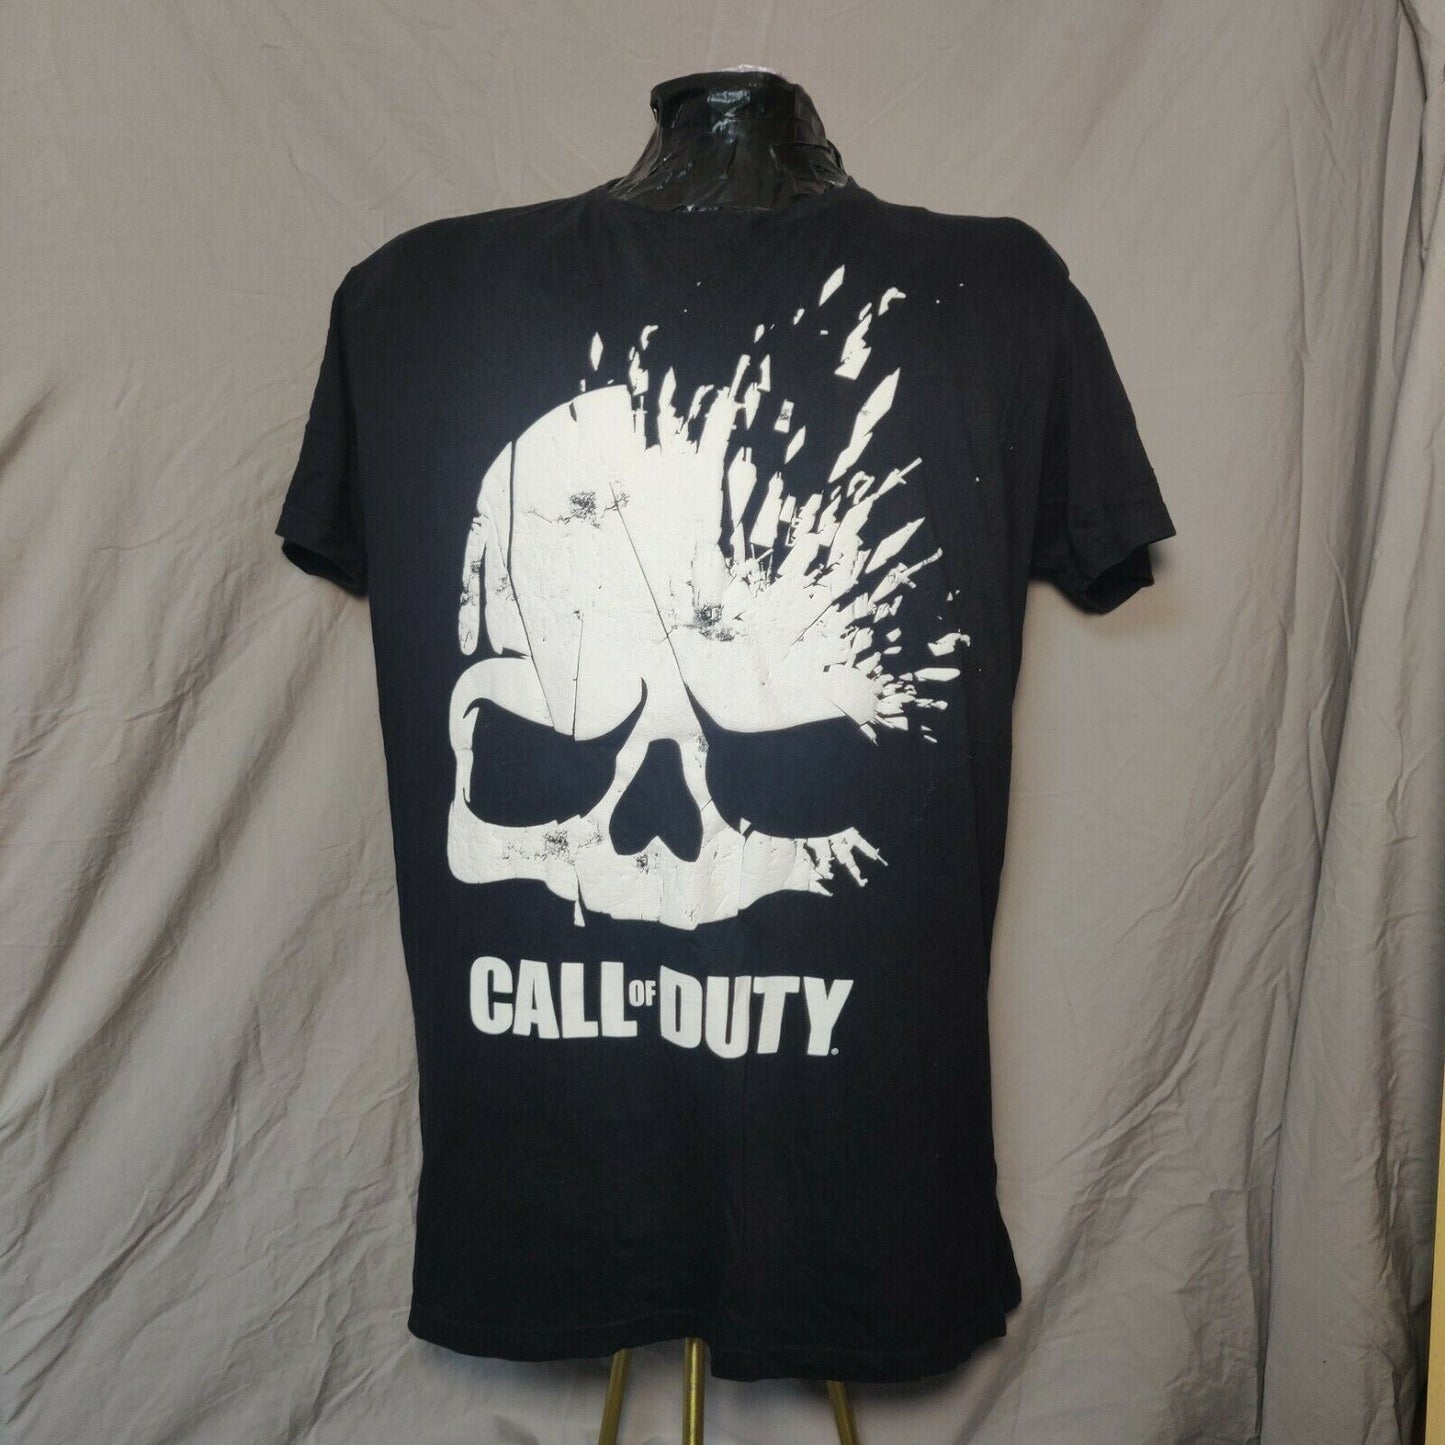 Call Of Duty Activision 2017 Black T-shirt Skull Ghost Graphic Men Size XL